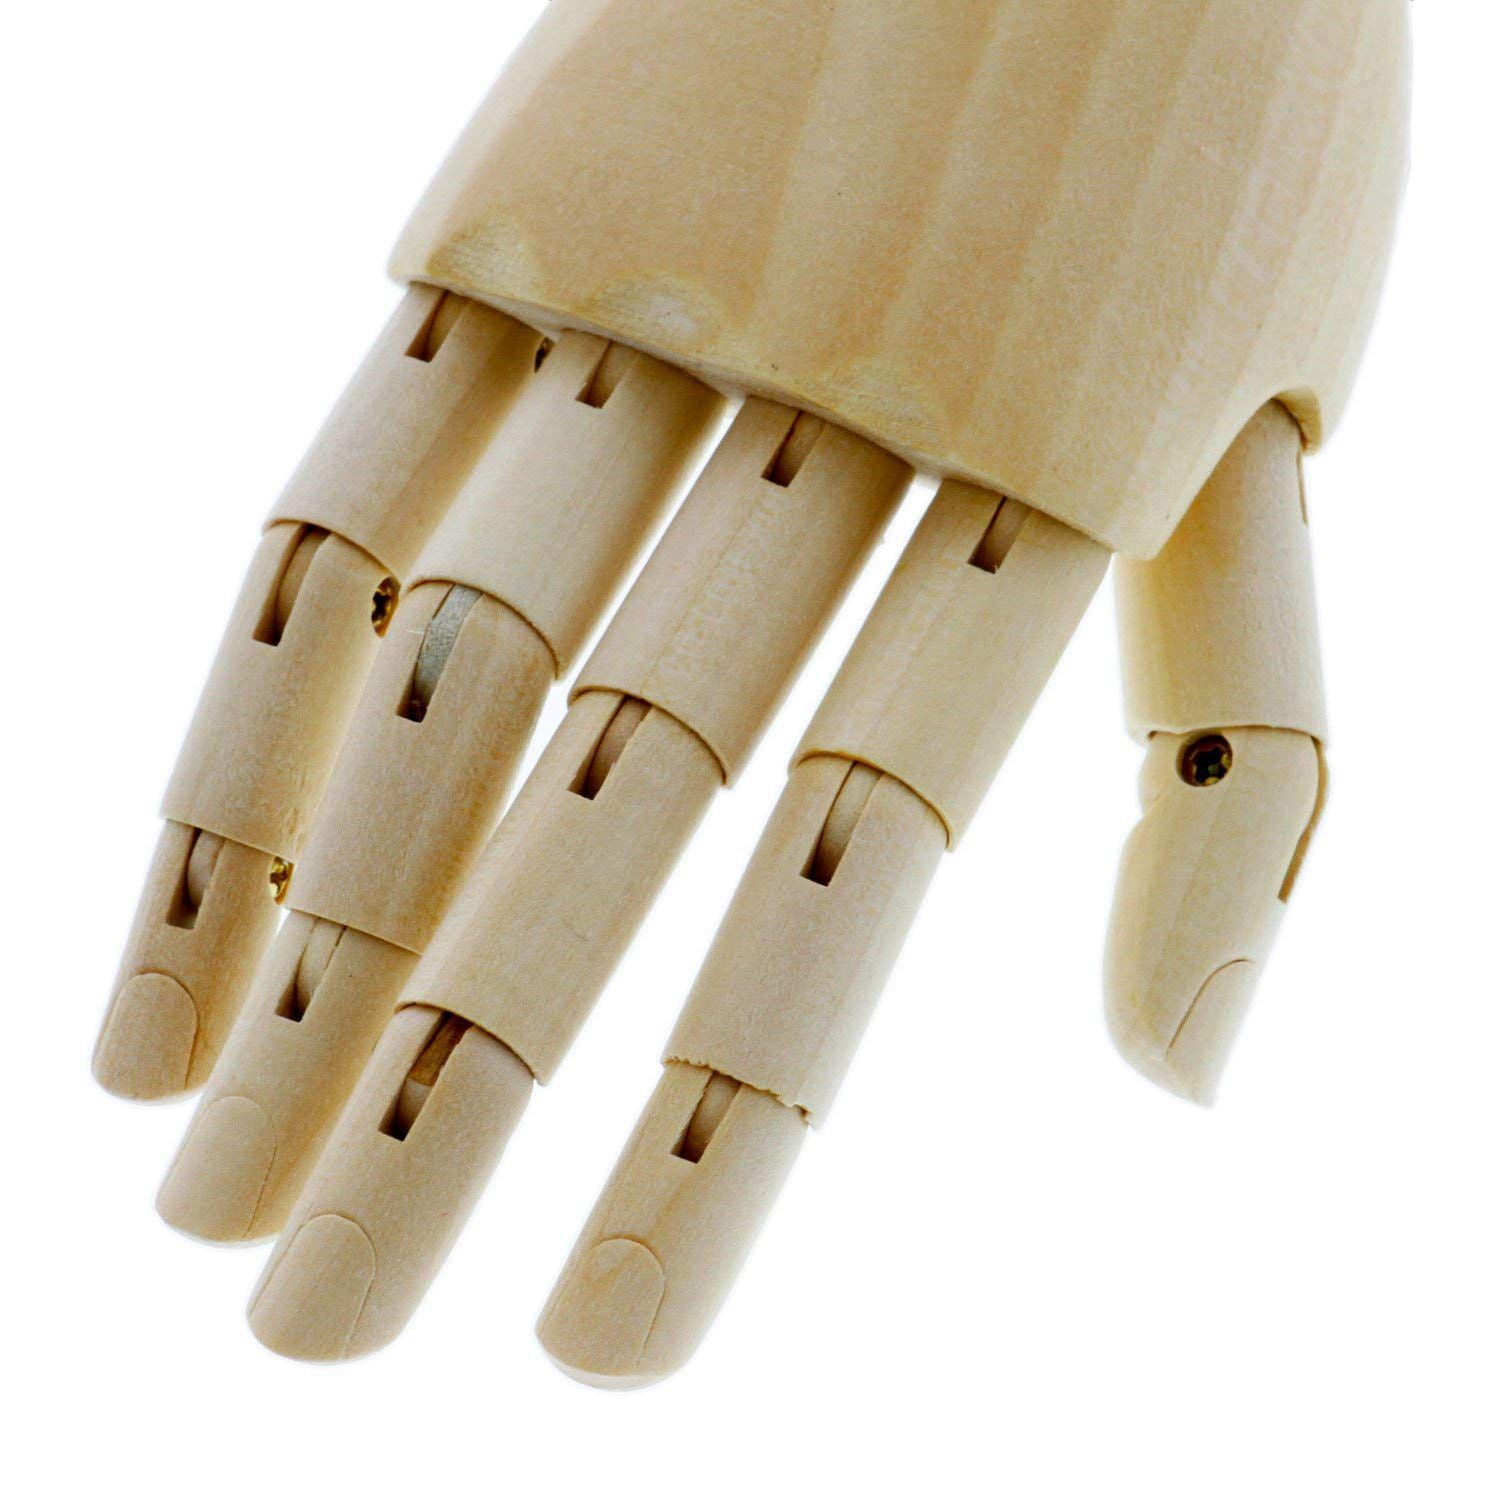 Katigan Wood Artist Drawing Manikin Articulated Mannequin with Wooden Flexible Fingers 10 inch Right Hand